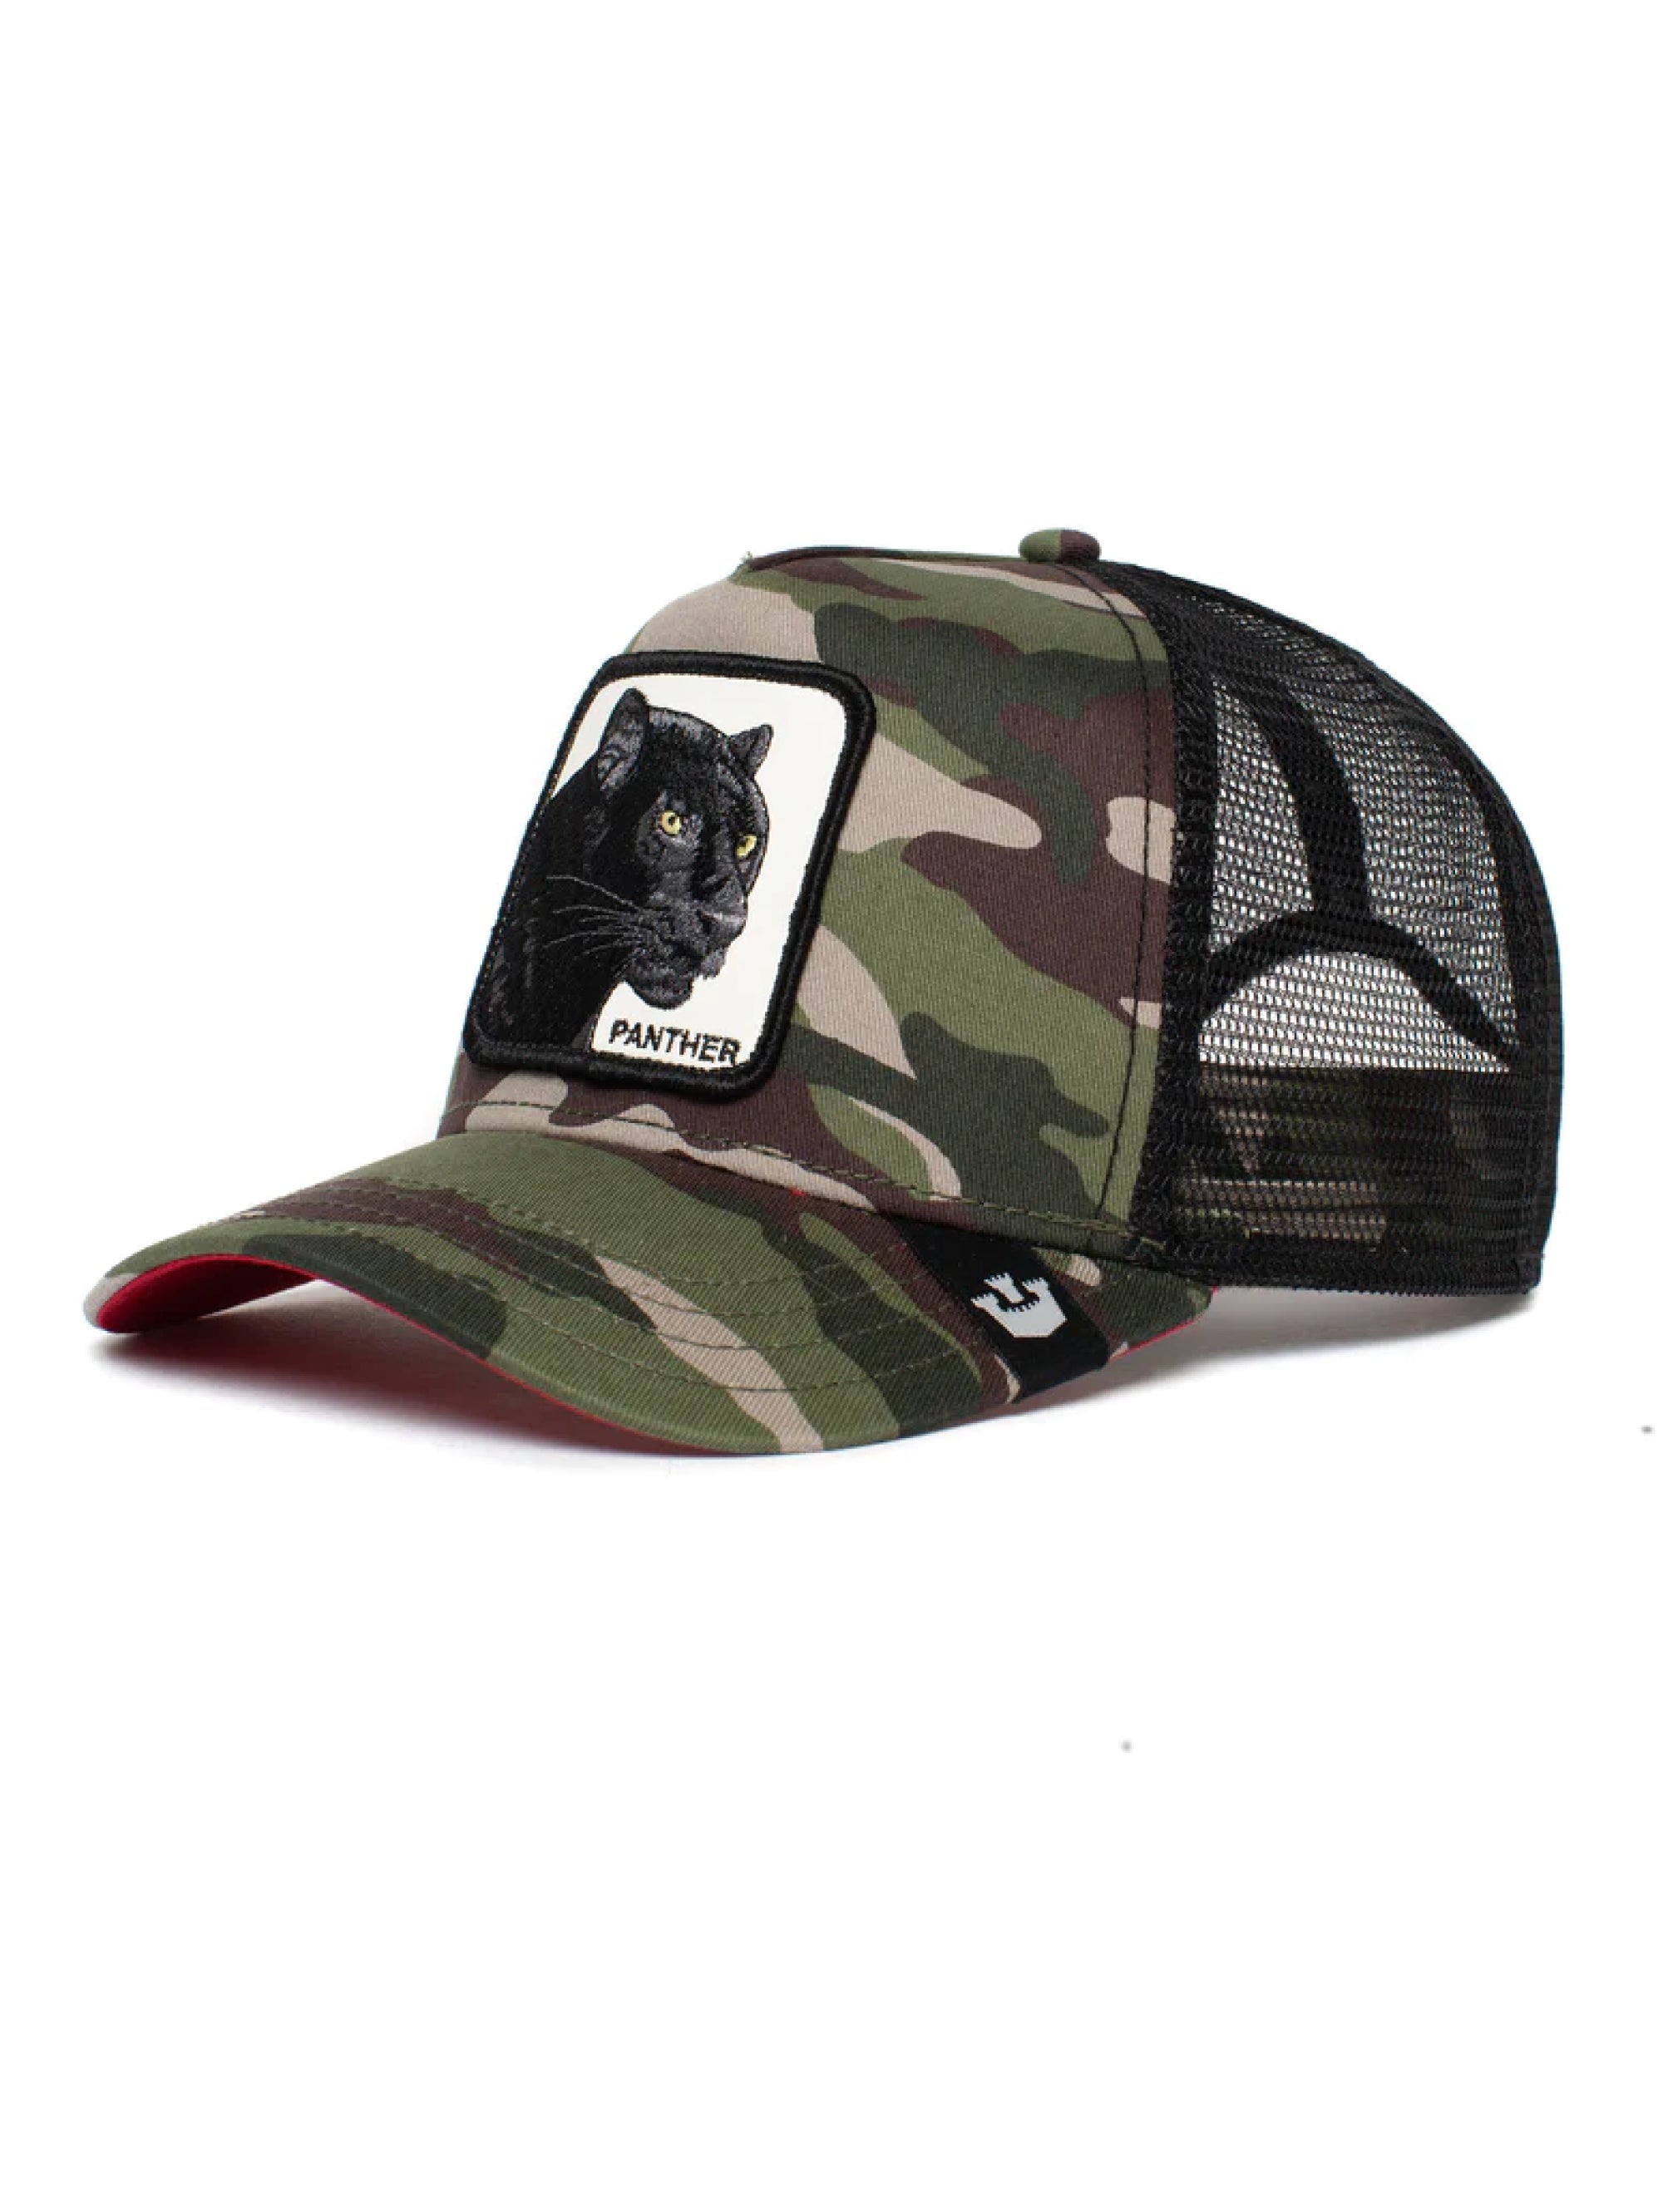 Cappello Trucker mit Patch The Panther